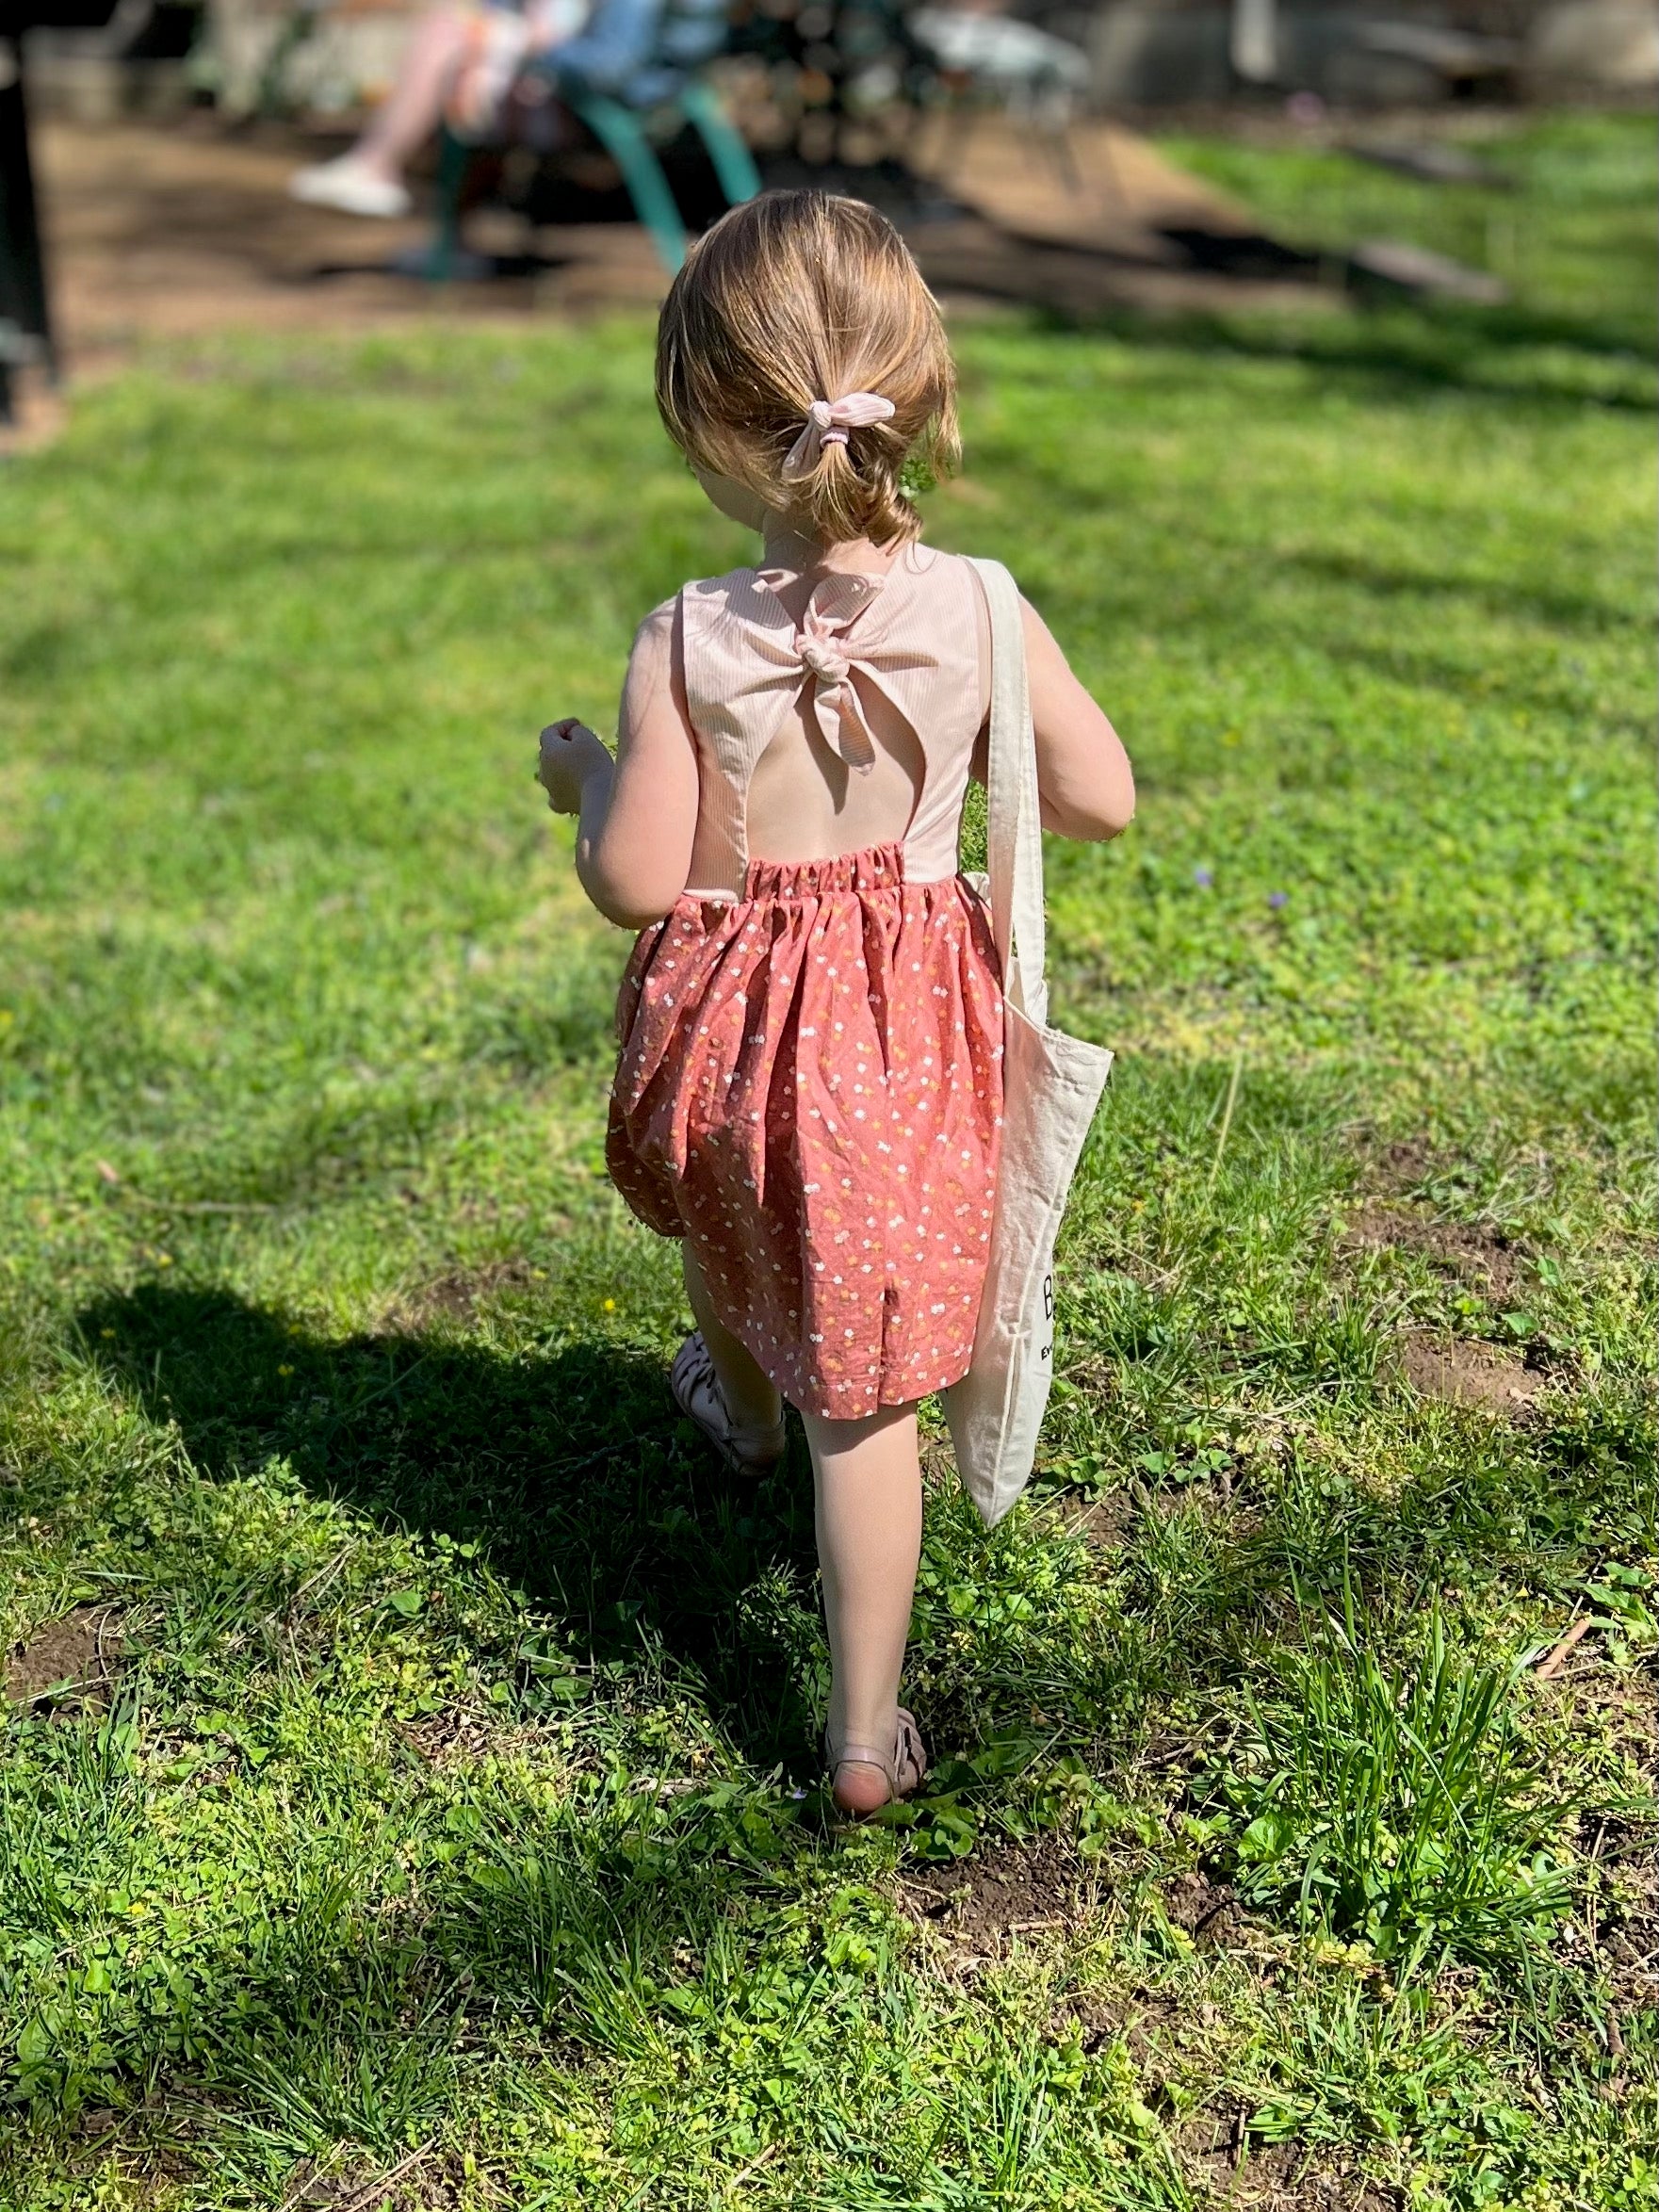 Pippa wearing her Daisy dress made using the Oh Me Oh My Sewing pattern